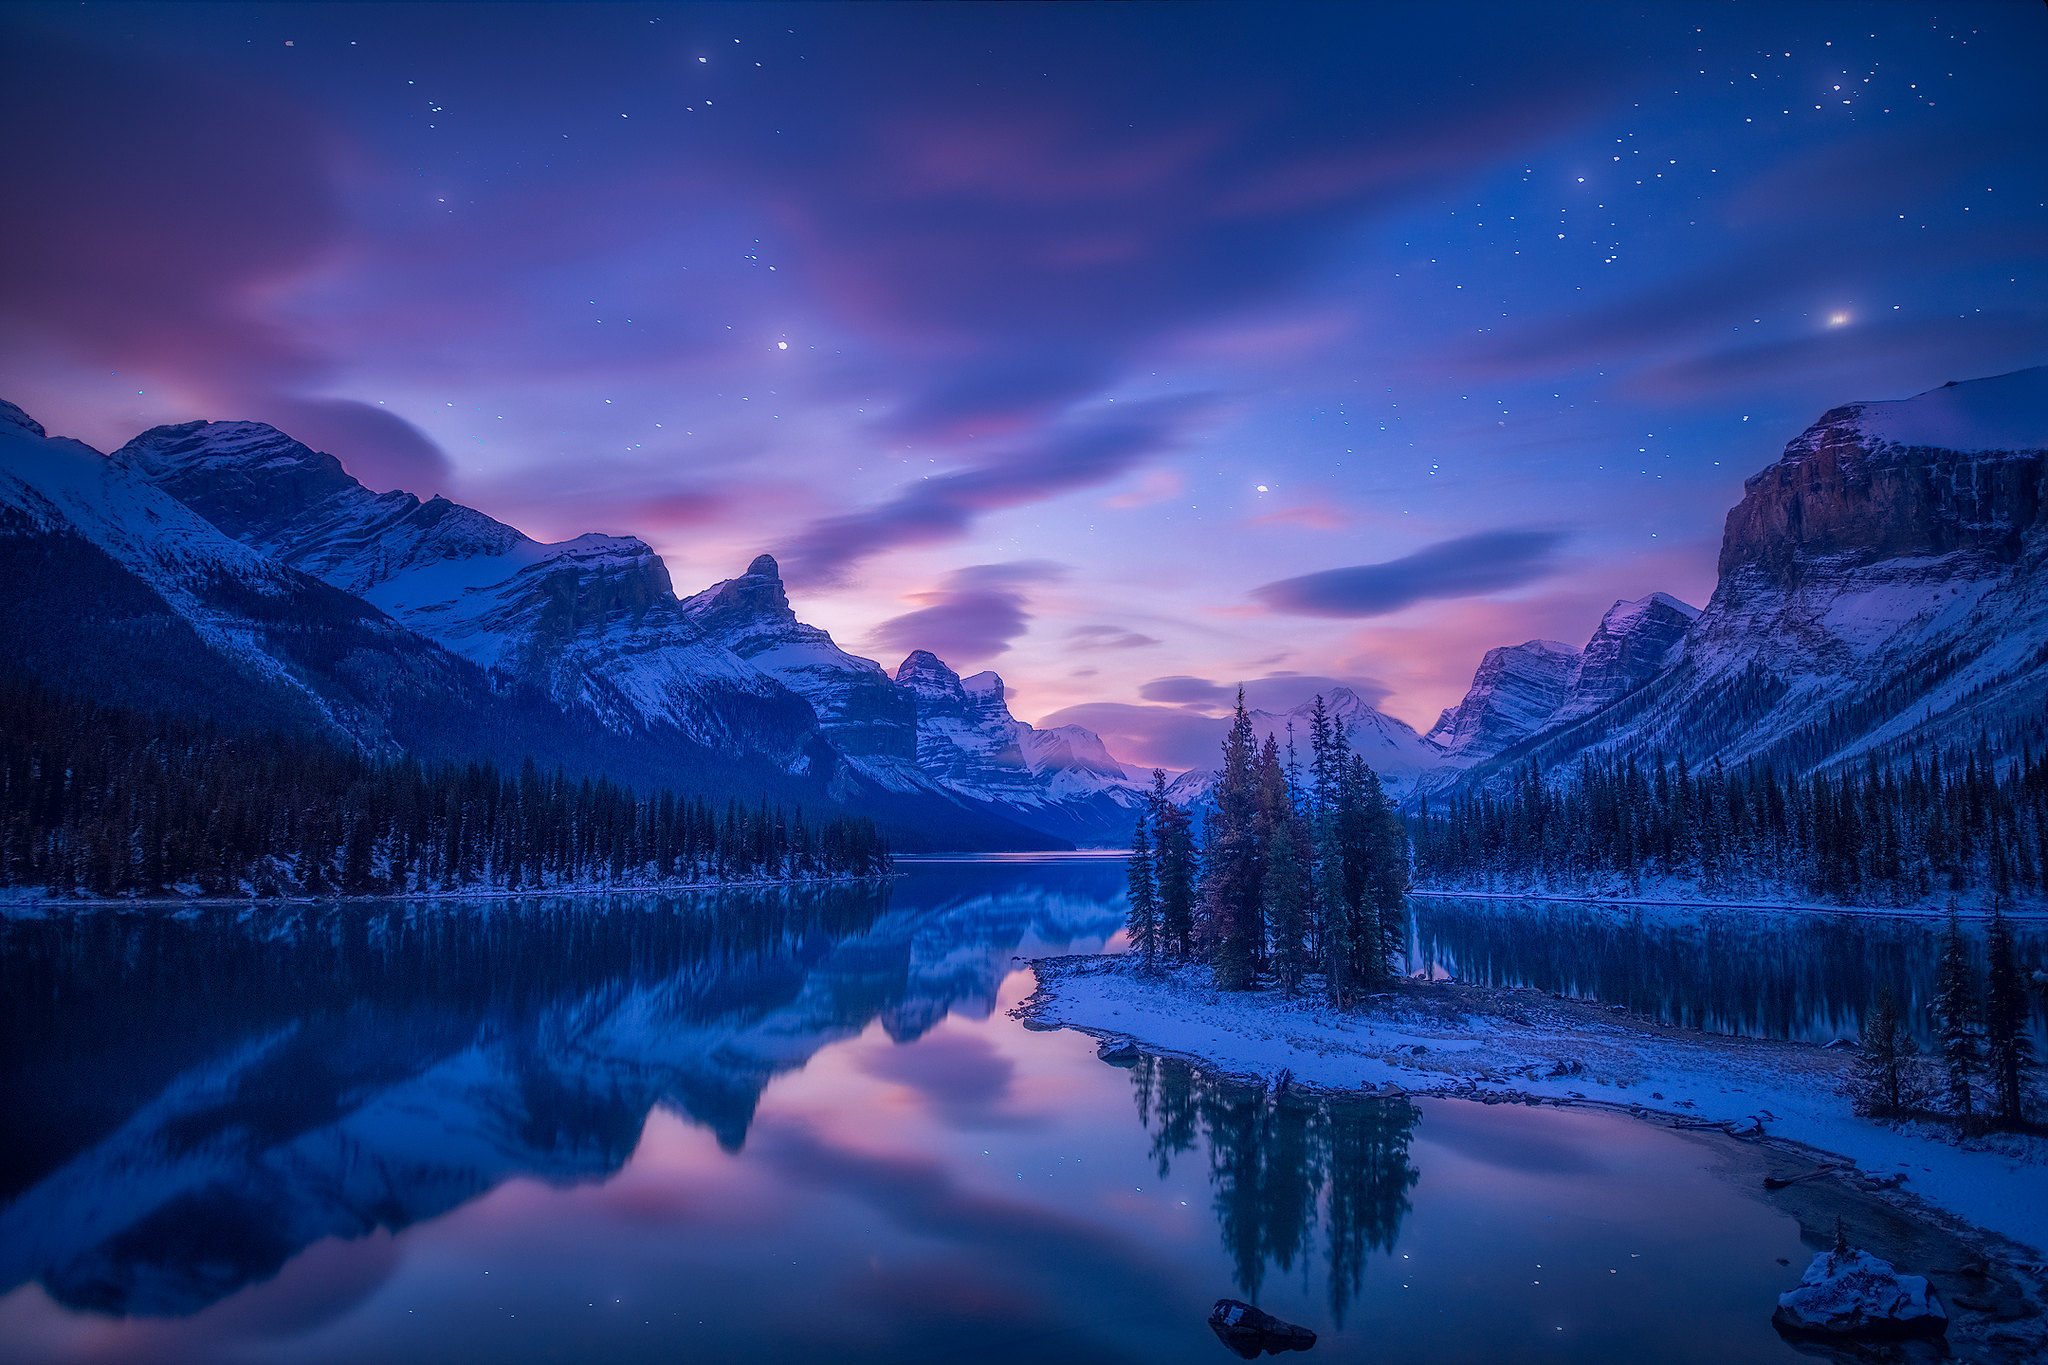 General 2048x1365 landscape nature water snowy mountain night stars lake reflection calm waters Spirit Island Maligne Lake calm sky trees snow Jasper National Park Canada mountains low light